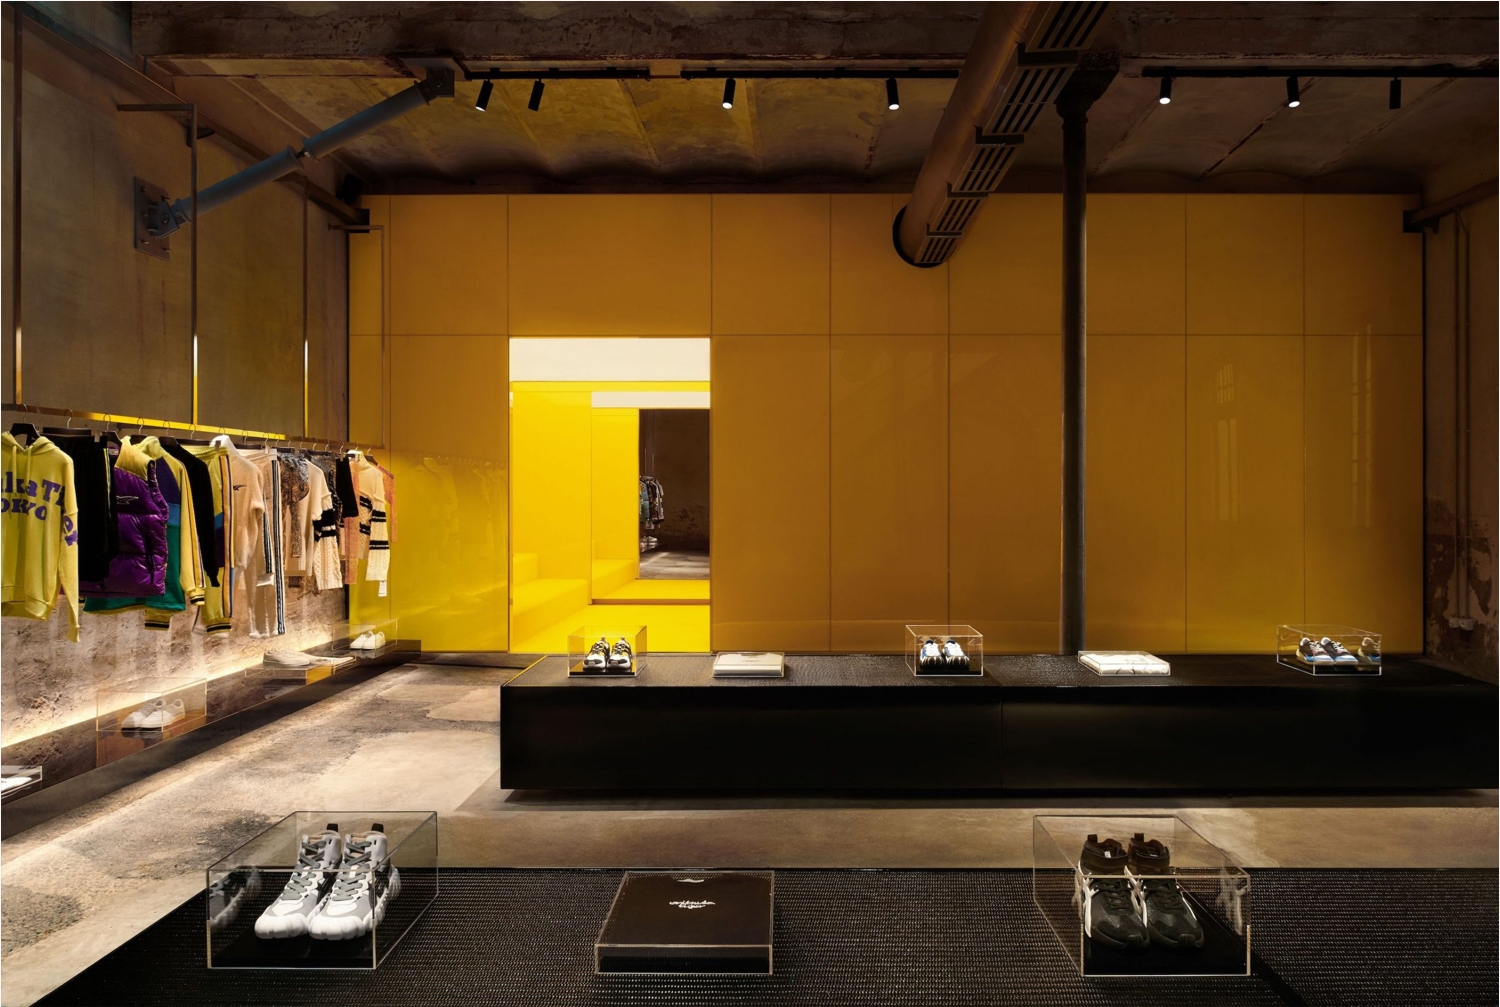 Introducing Onitsuka Tiger Milan, the first flagship store in